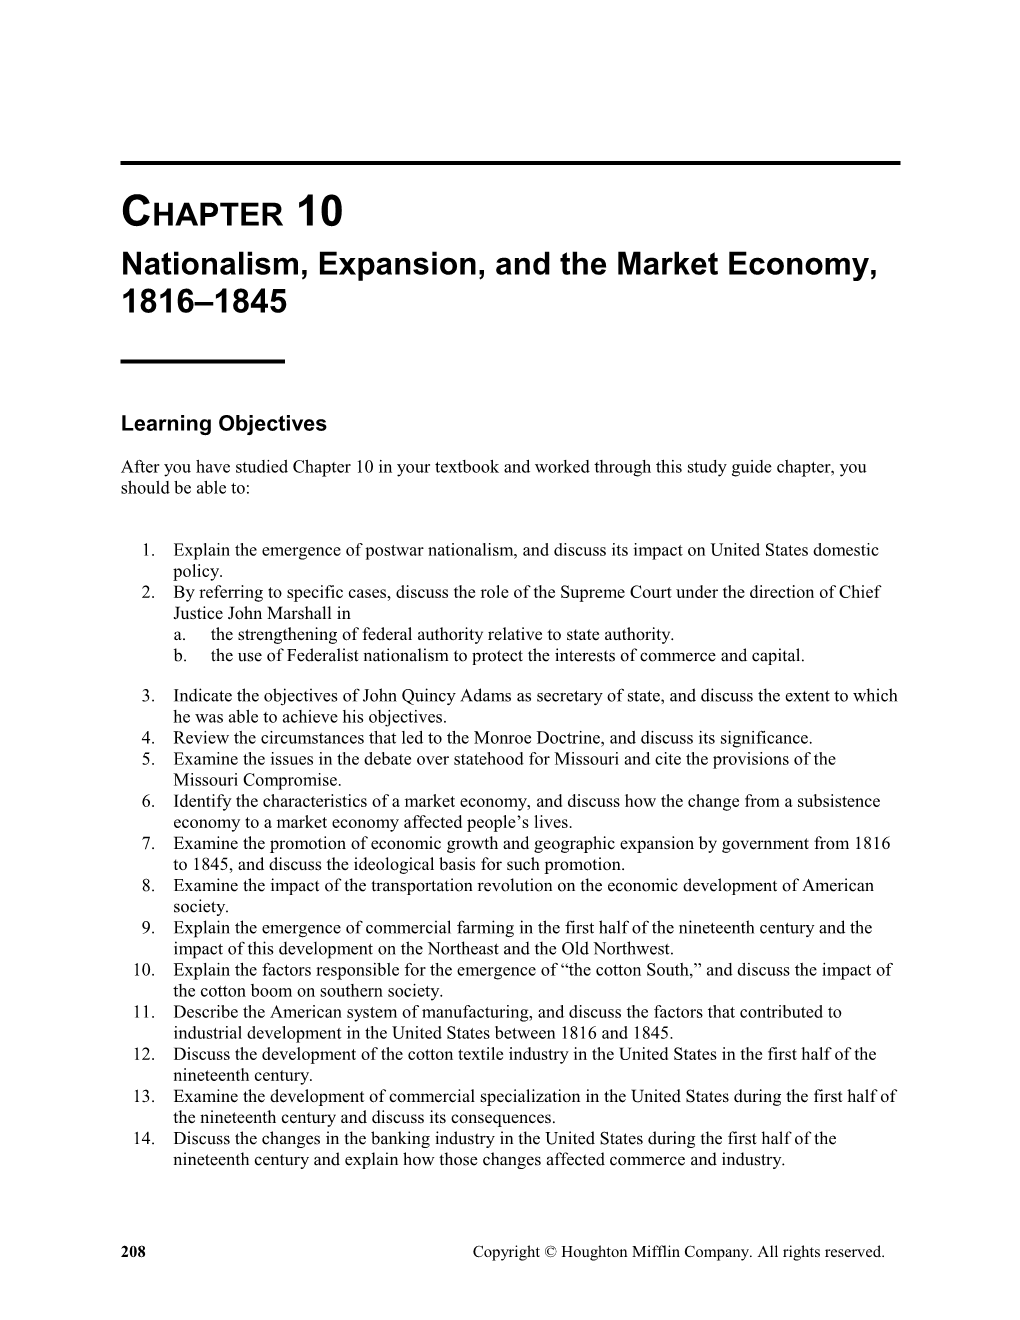 Nationalism, Expansion, and the Market Economy, 1816 18451